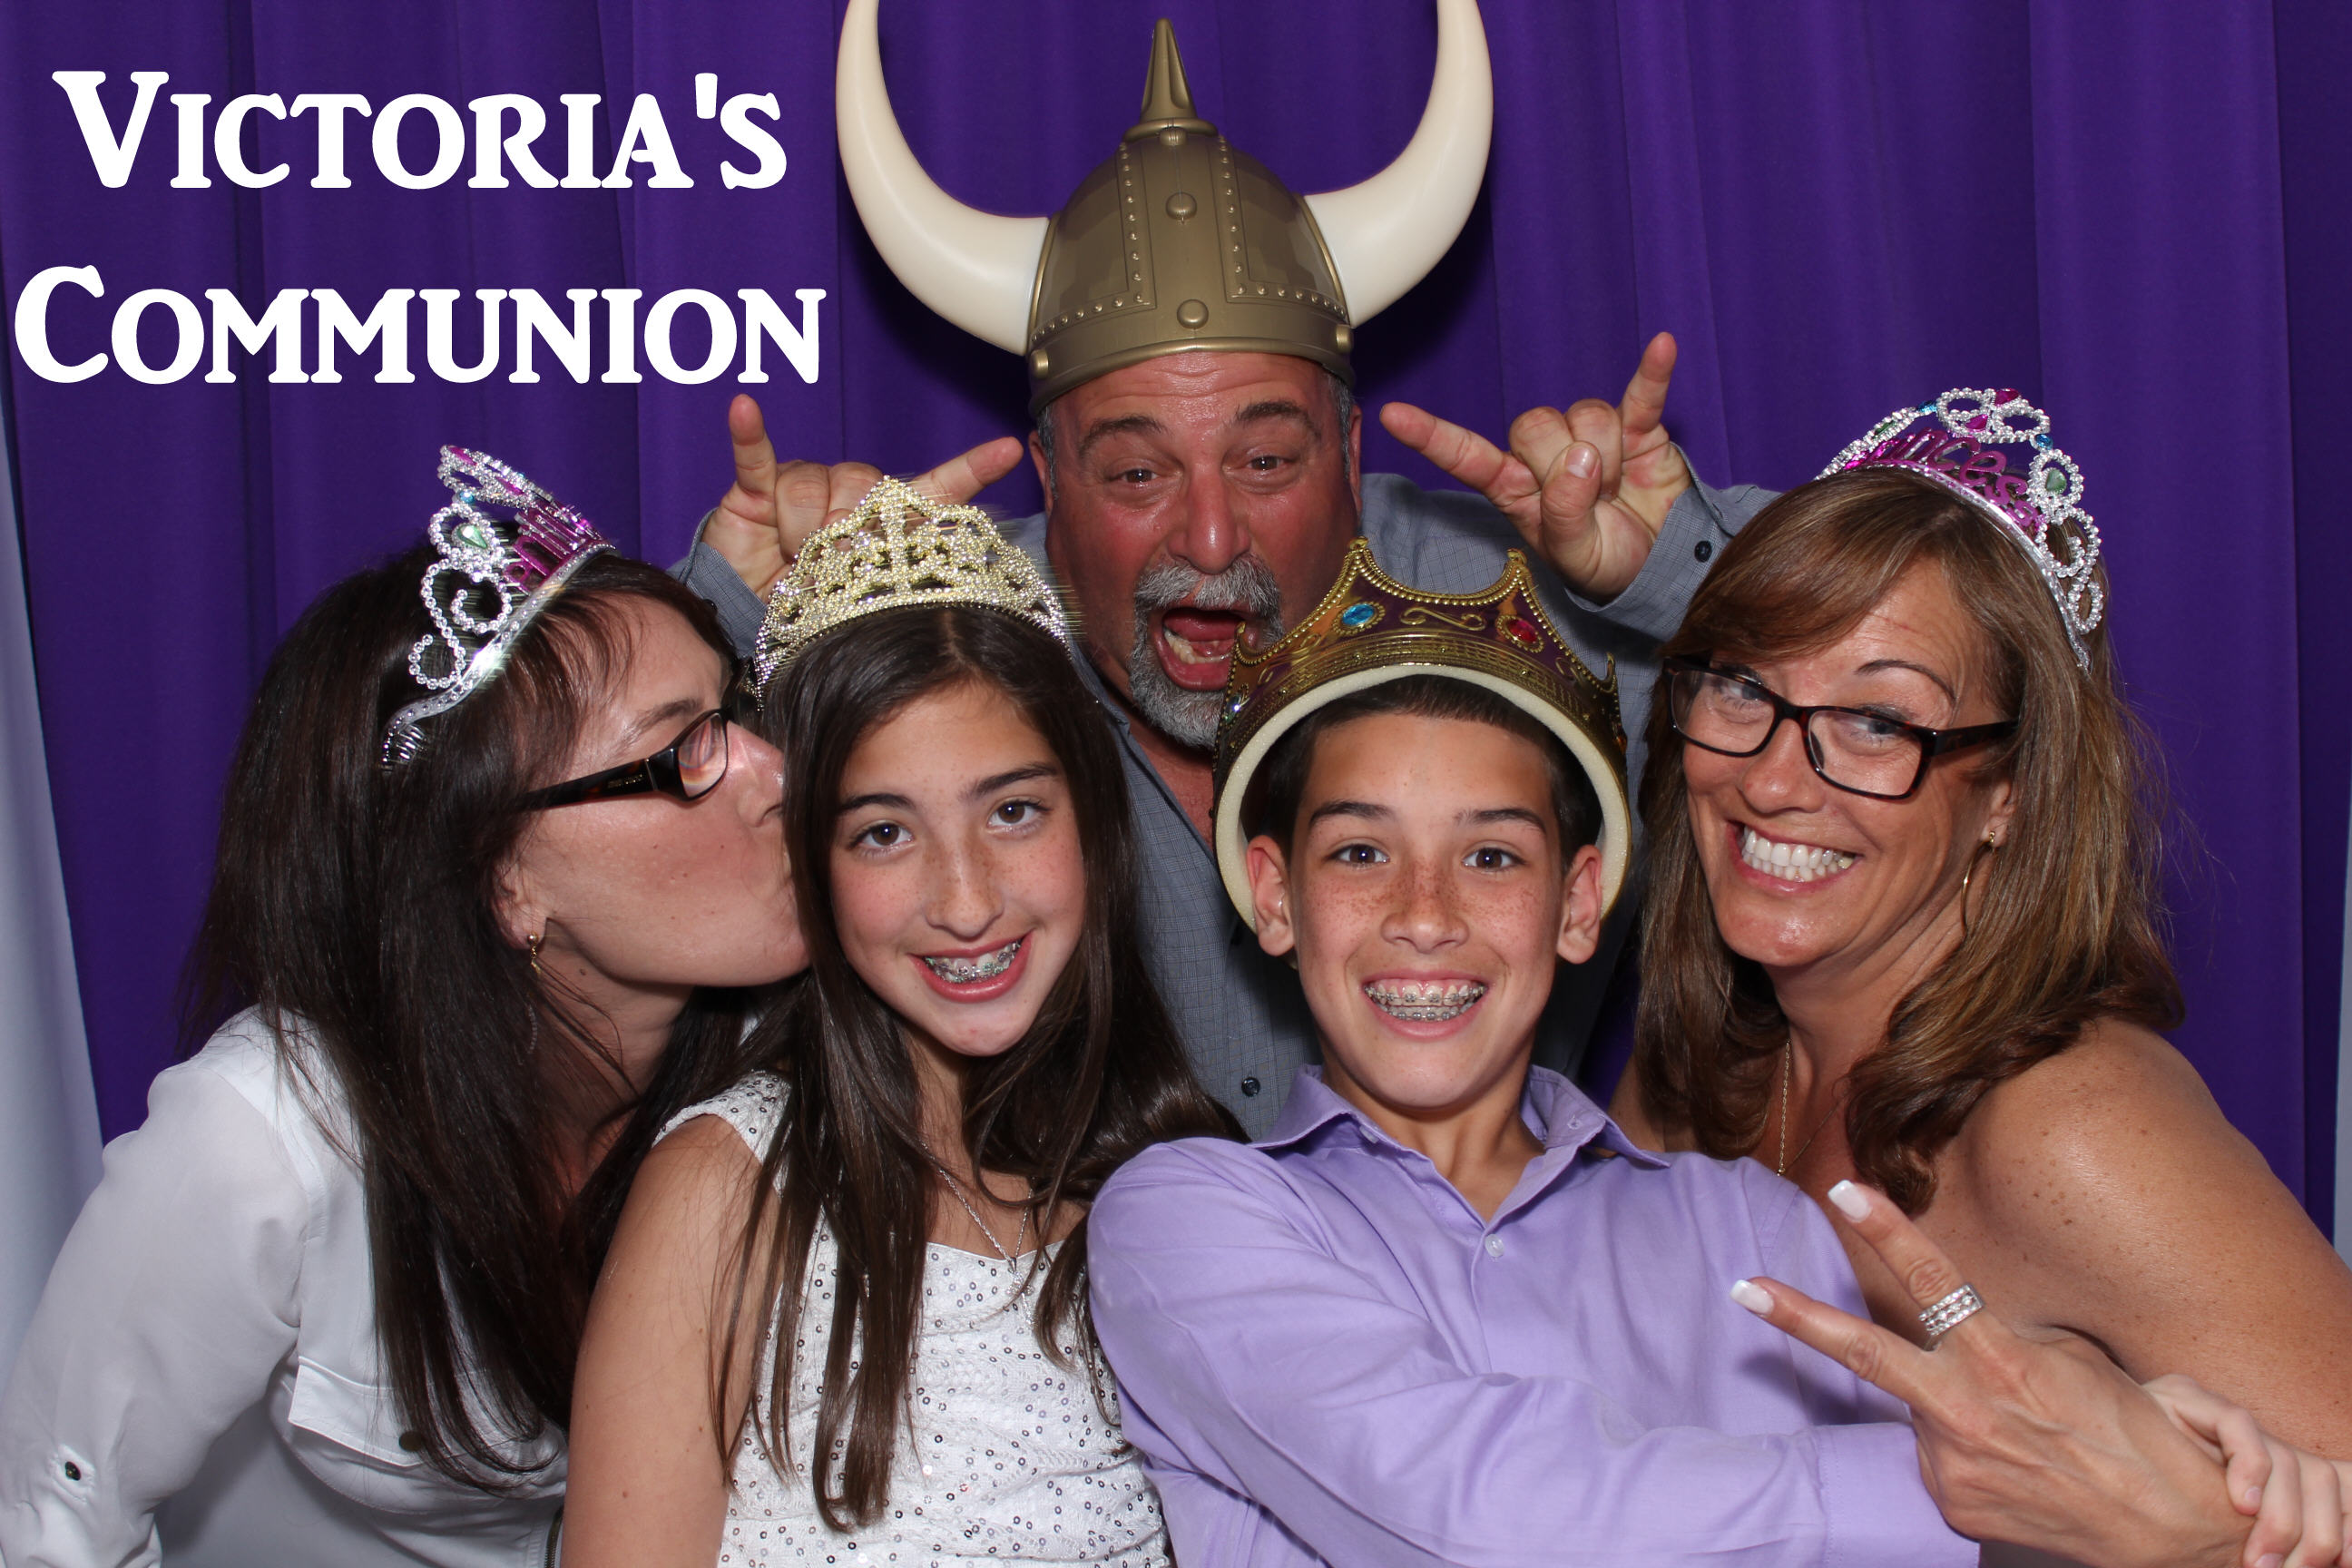 Victoria's Photo Booth in Staten Island